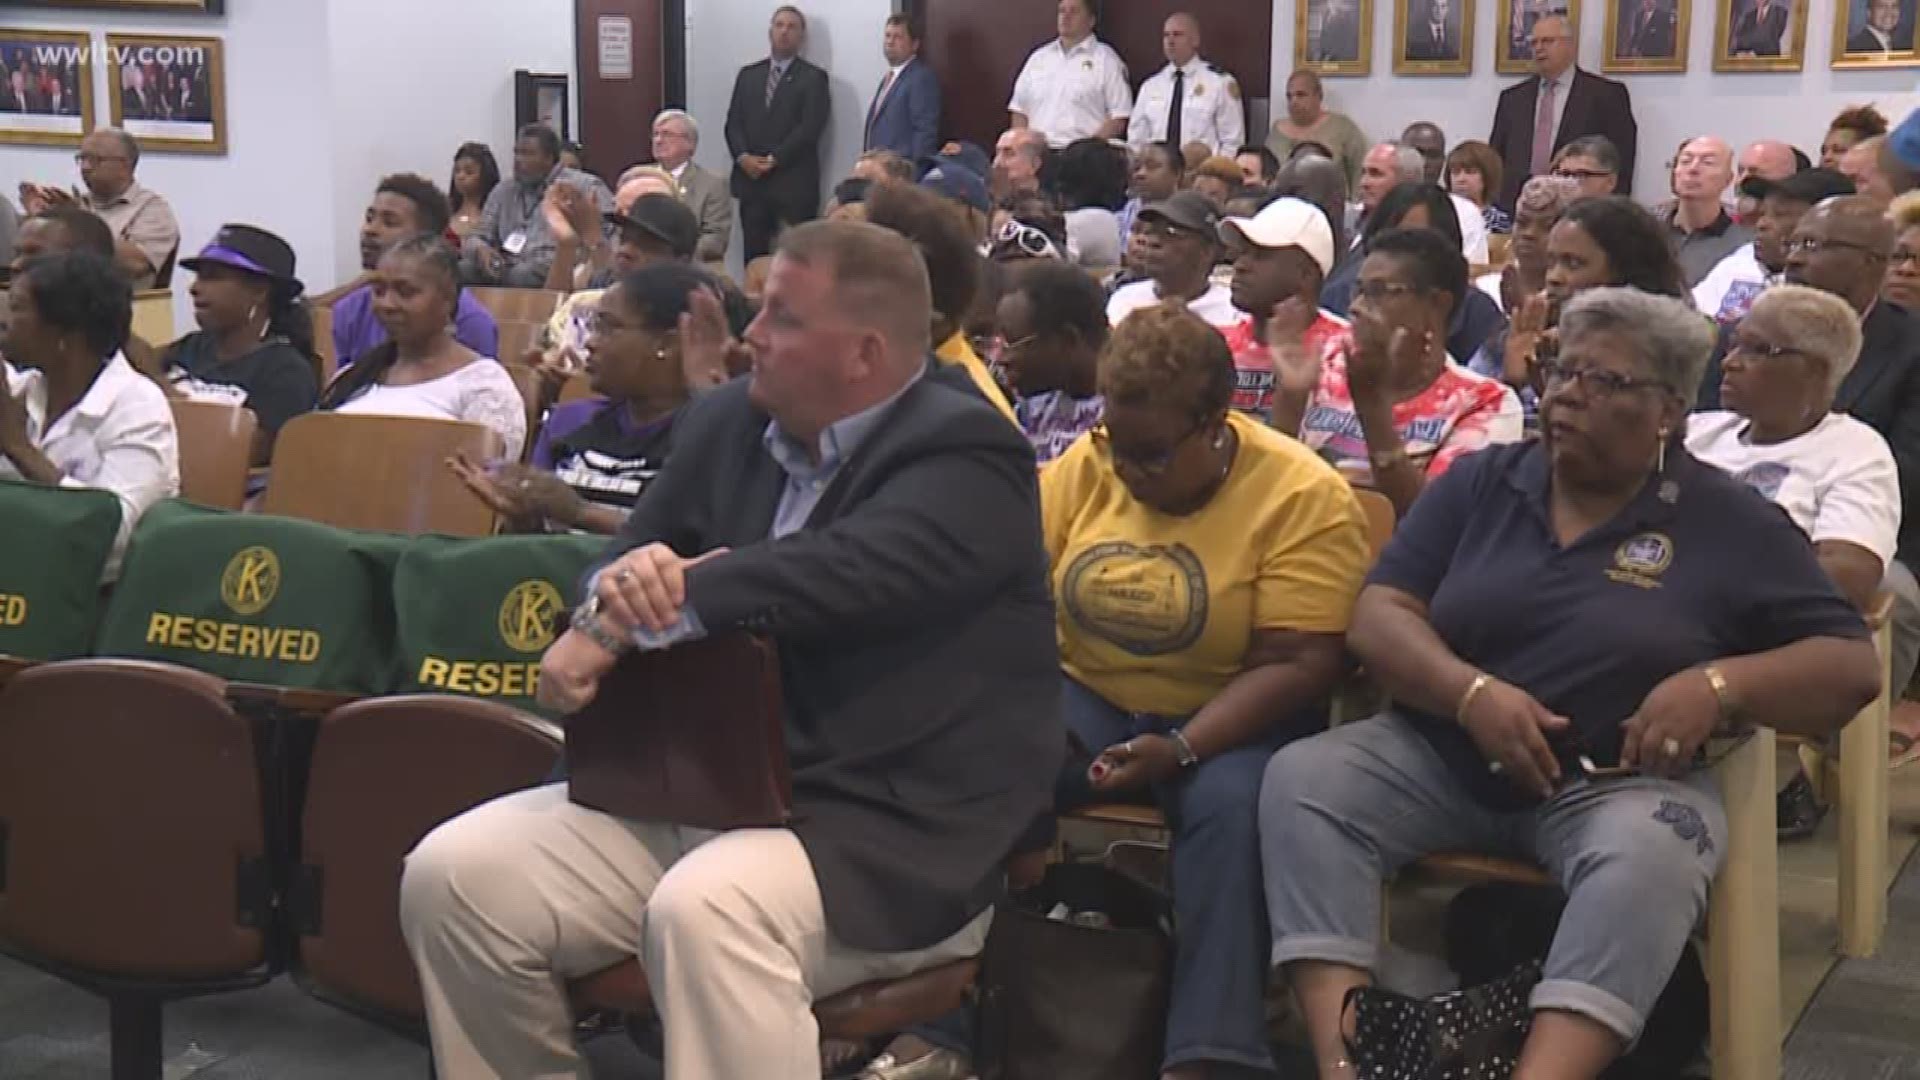 Families of those killed by police are speaking out and hoping to create change tonight. They held a peaceful sit-in at Kenner's city council meeting this evening.